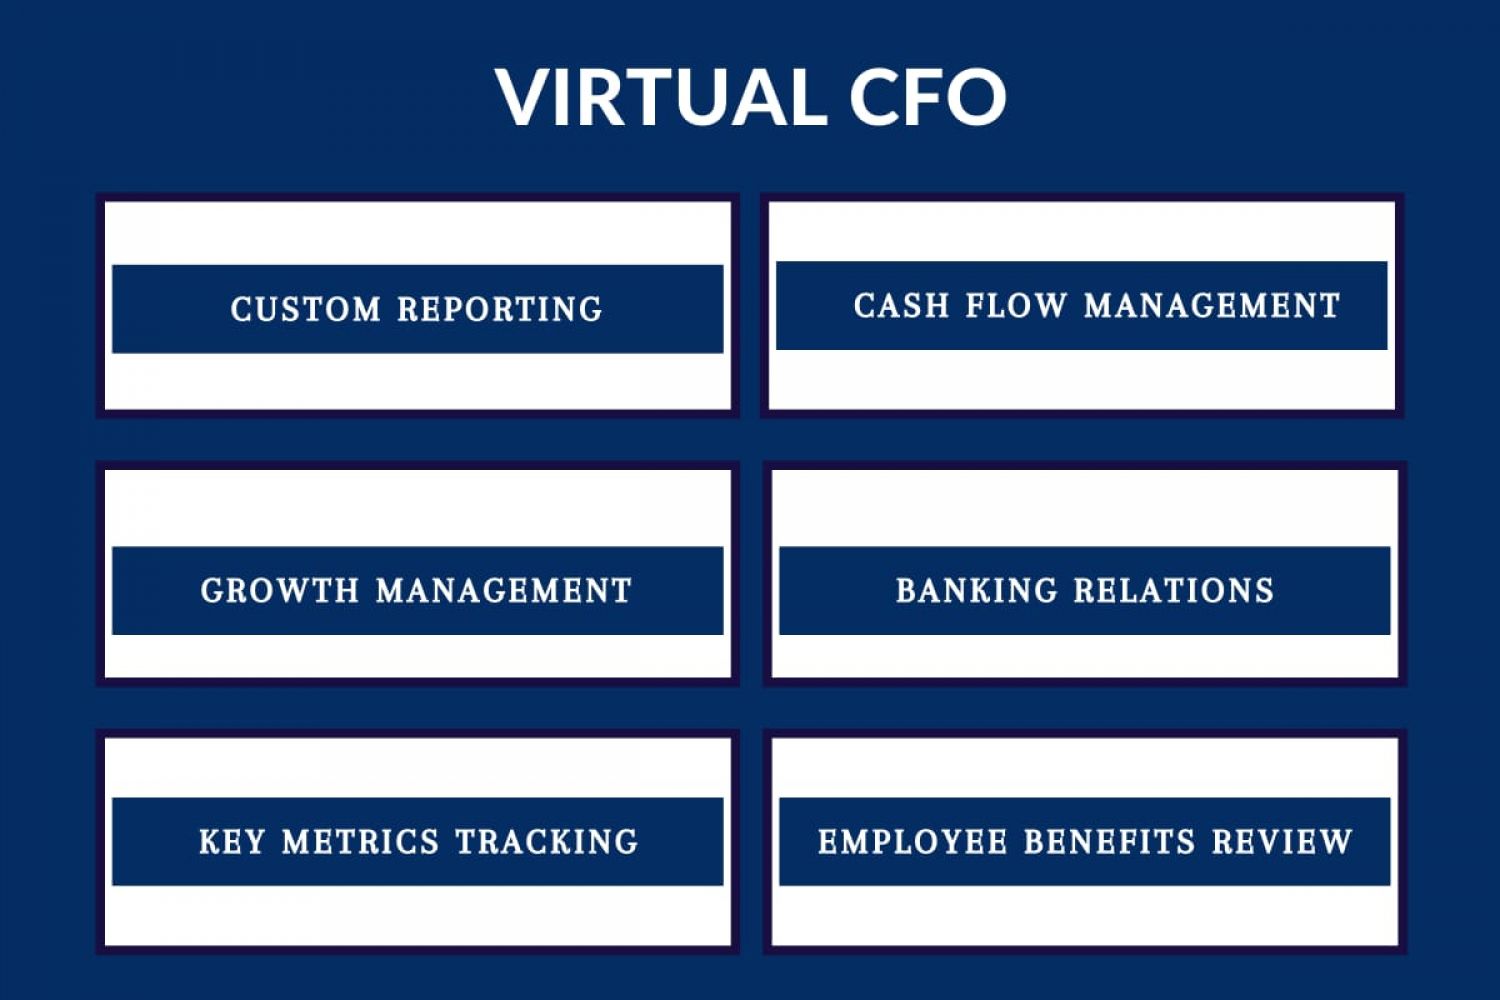 How much do I pay for Virtual CFO services in Delhi & NCR?